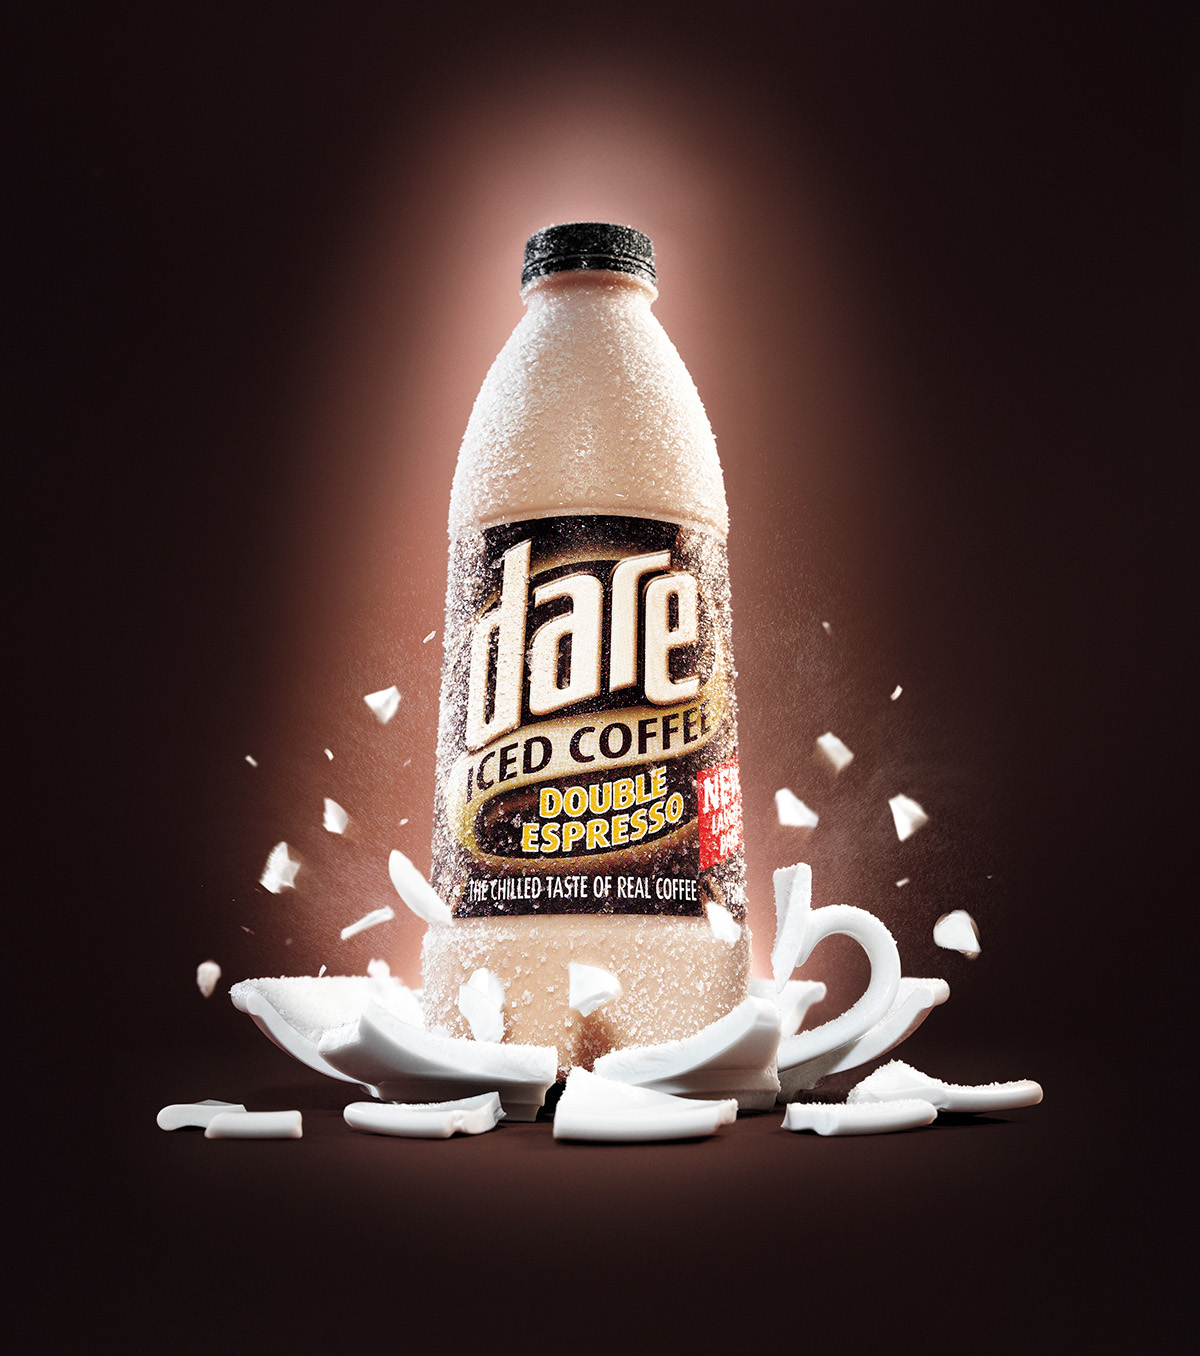 Dare iced coffee product frost motion smash drink beverage